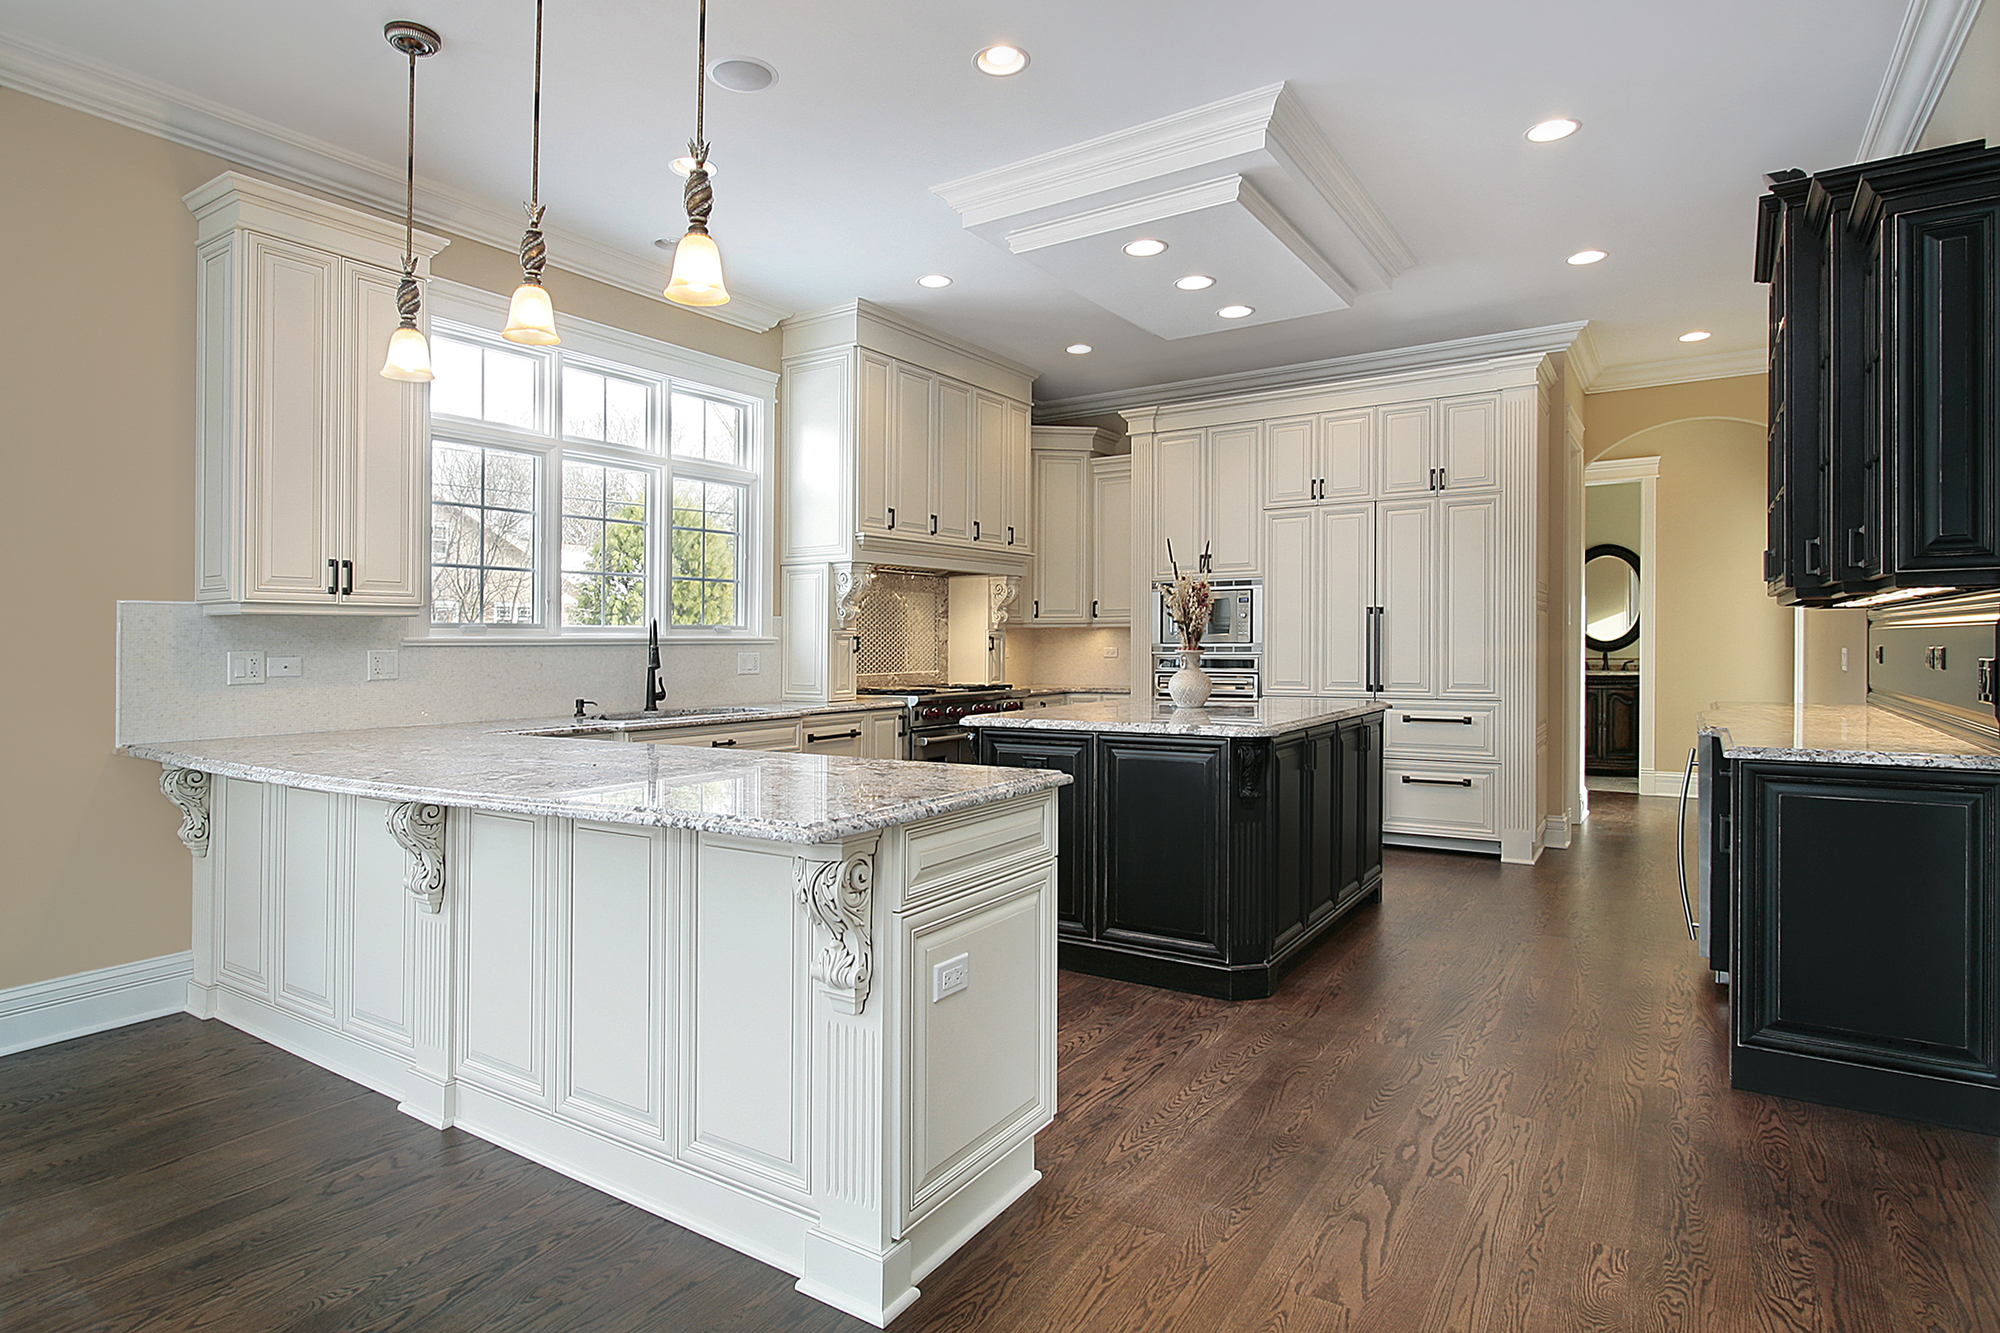 9 Timeless Kitchen Design Trends - Homes For Sale in Georgetown Texas